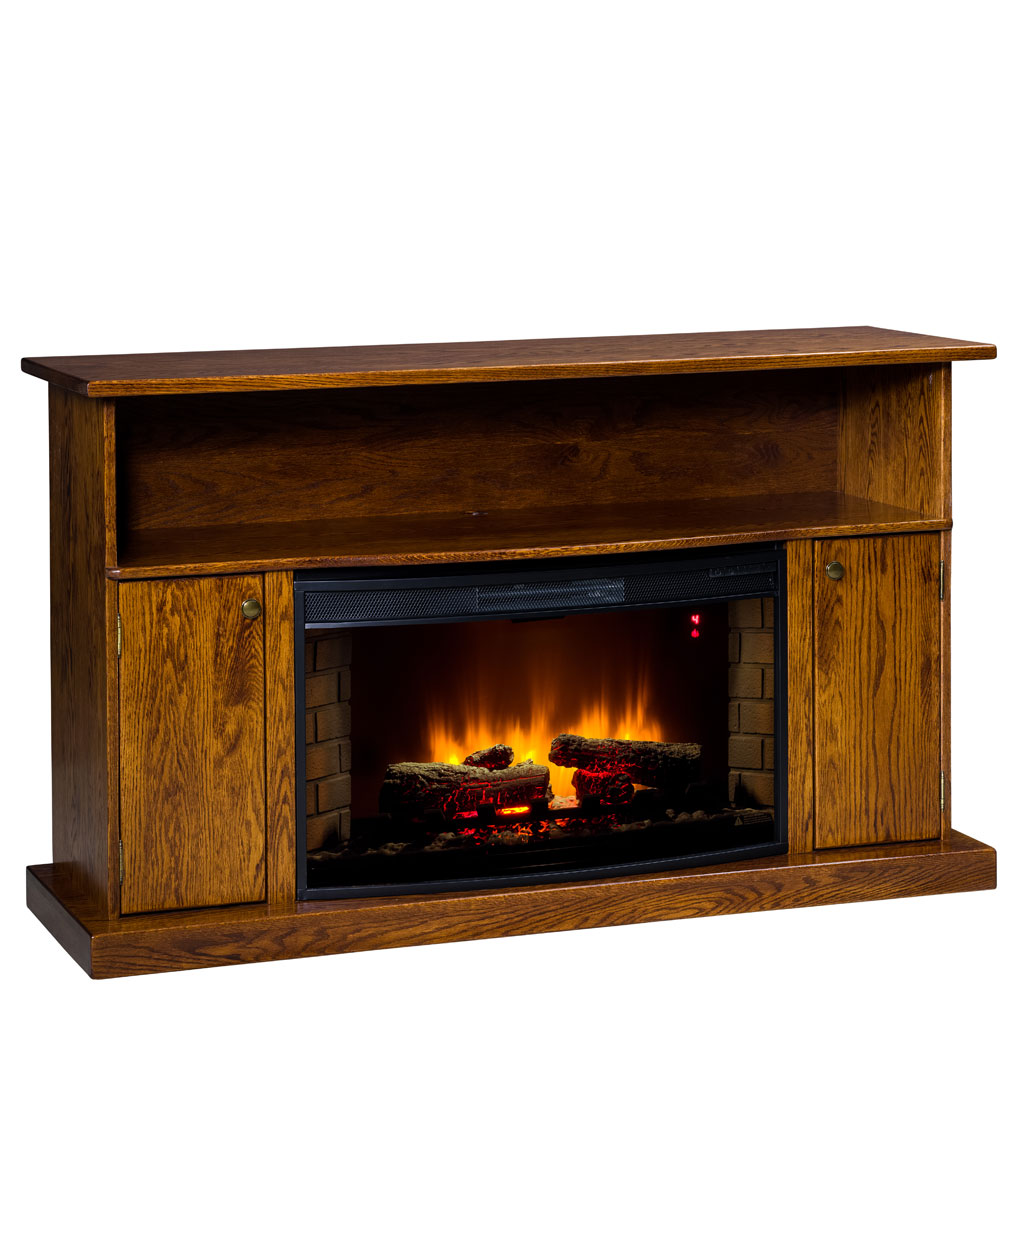 Cherry Fireplace Tv Stand Luxury Cheyenne Series Tv Stand with Space Heater 302